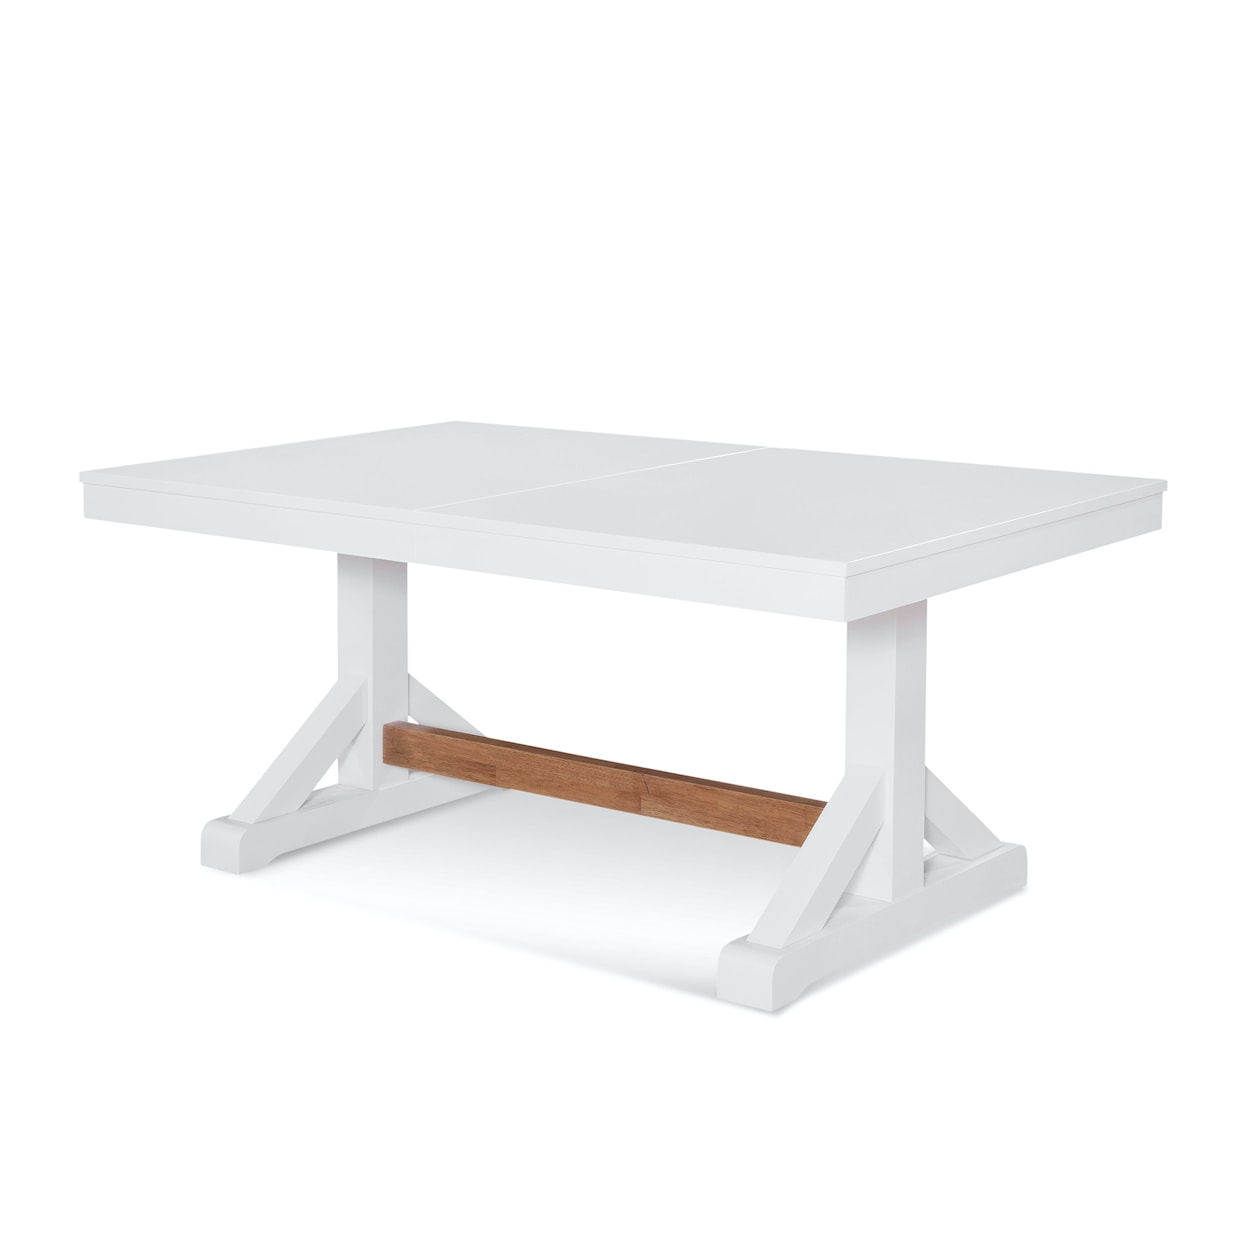 Braxton Culler Hues Hues Extension Trestle Dining Table